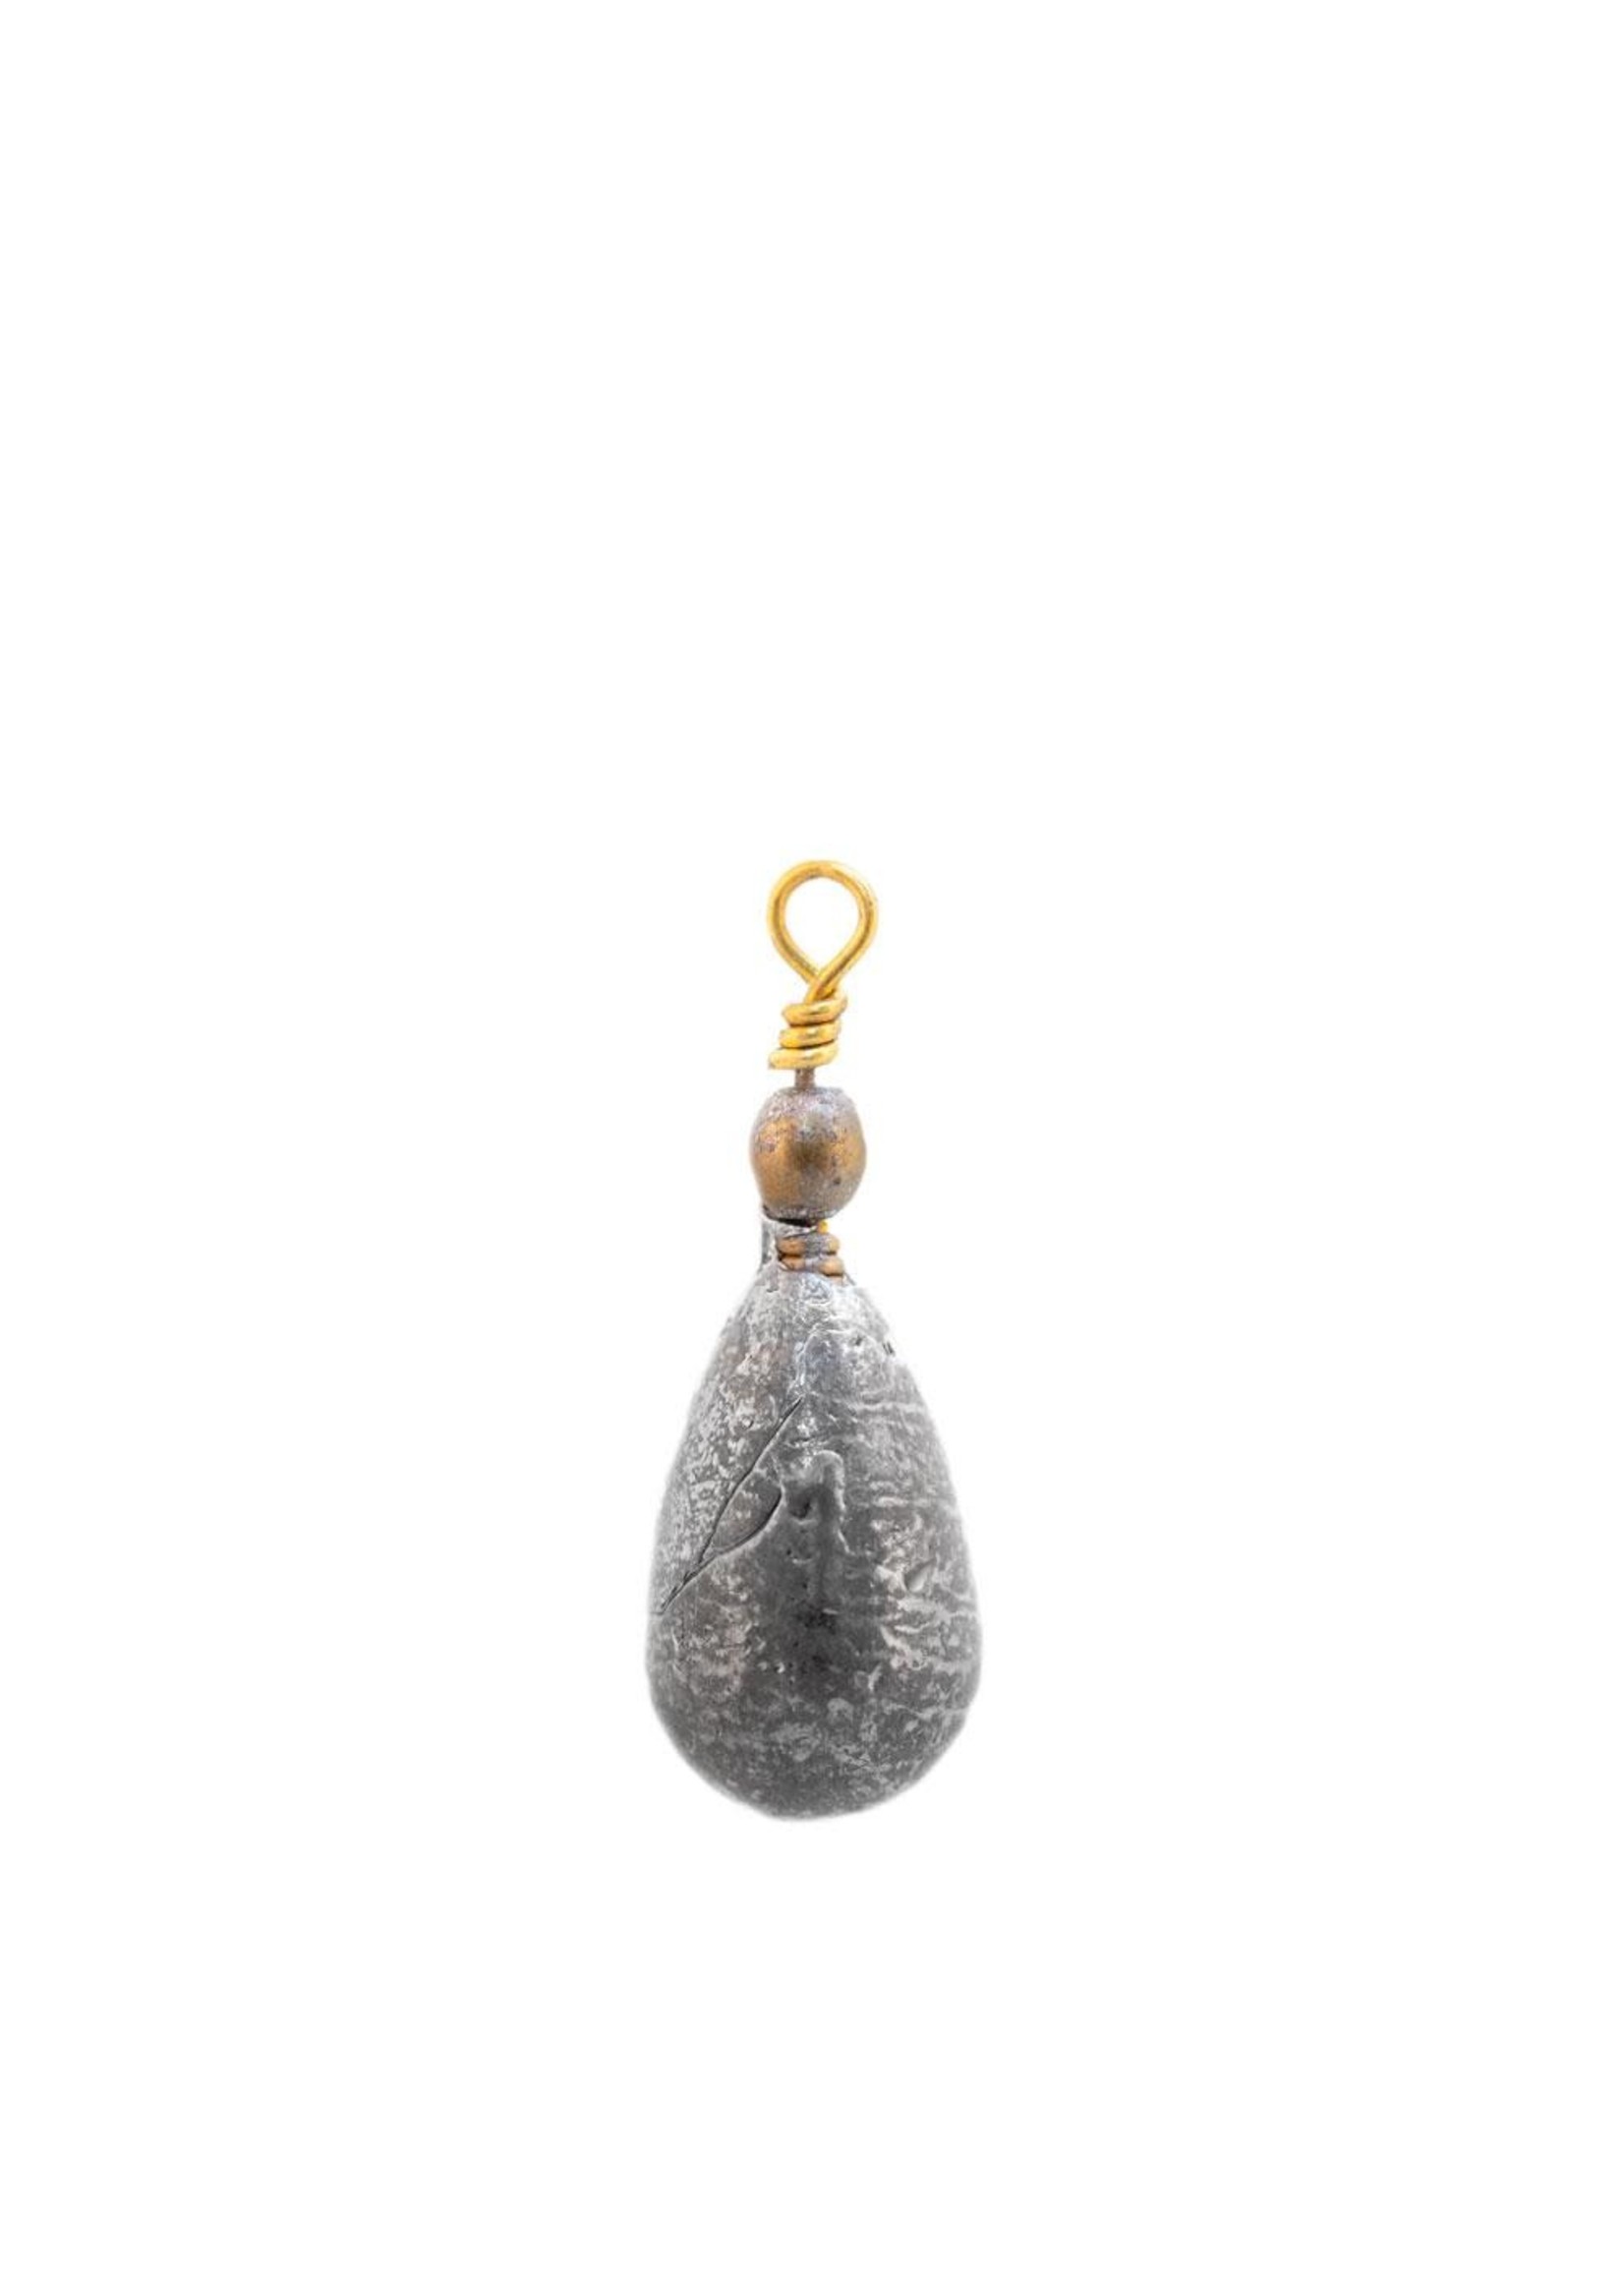 OUTDOOR BOUND BELL SINKERS 1-1/2oz 1PC